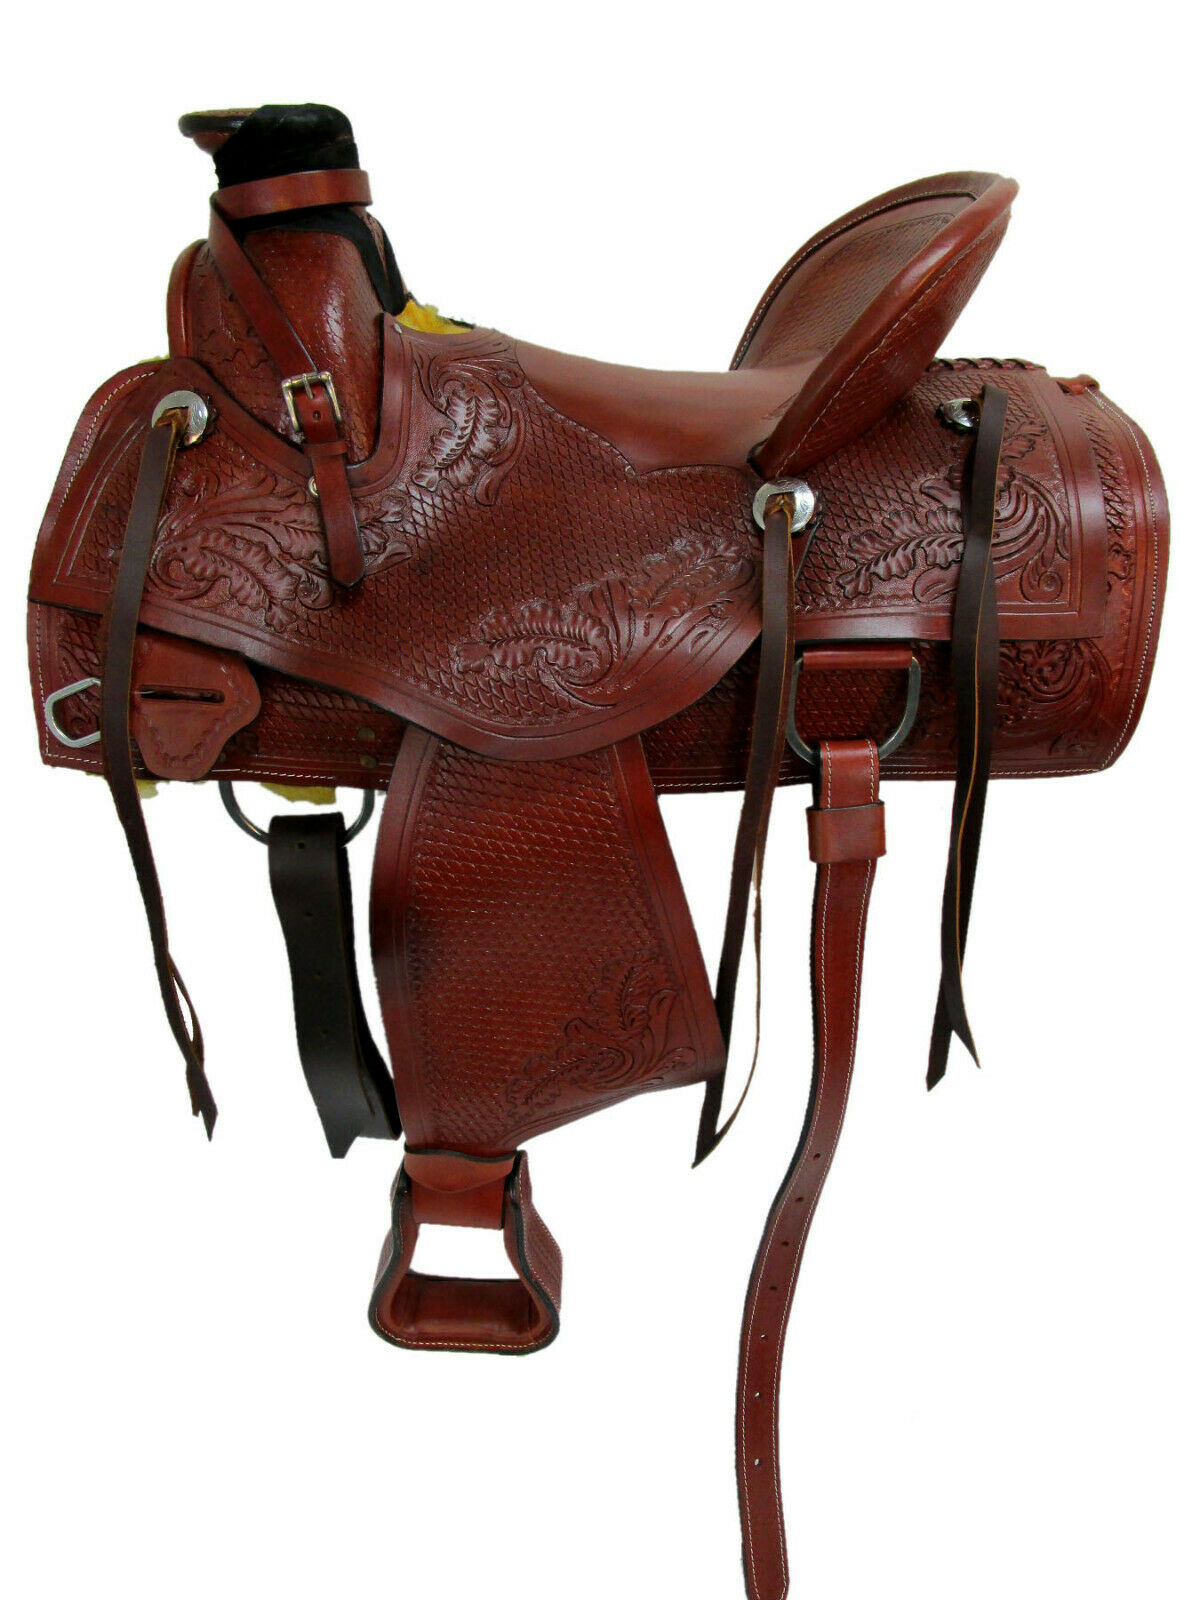 RANCH ROPING WESTERN SADDLE TOOLED HORSE PLEASURE ROUGH OUT LEATHER 15 16 17 